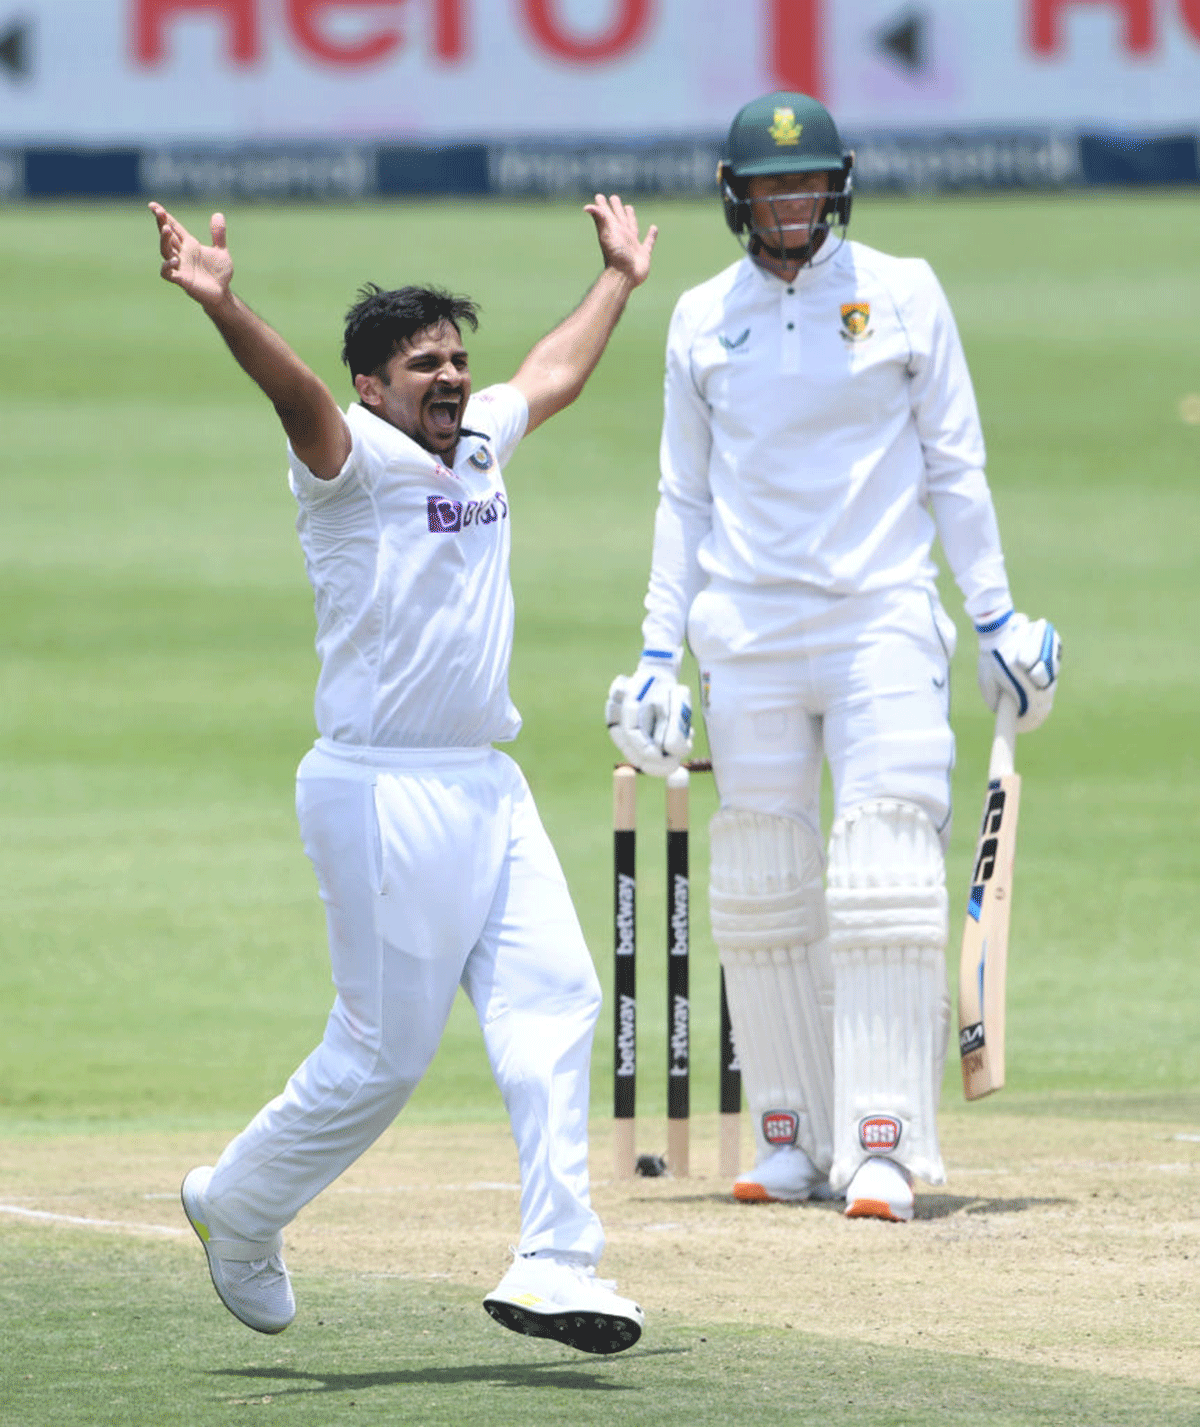 India pacer Shardul Thakur celebrates the wicket of South Africa's Rassie van der Dussen during Day 2 of the second Test, in Johannesburg, on Tuesday.